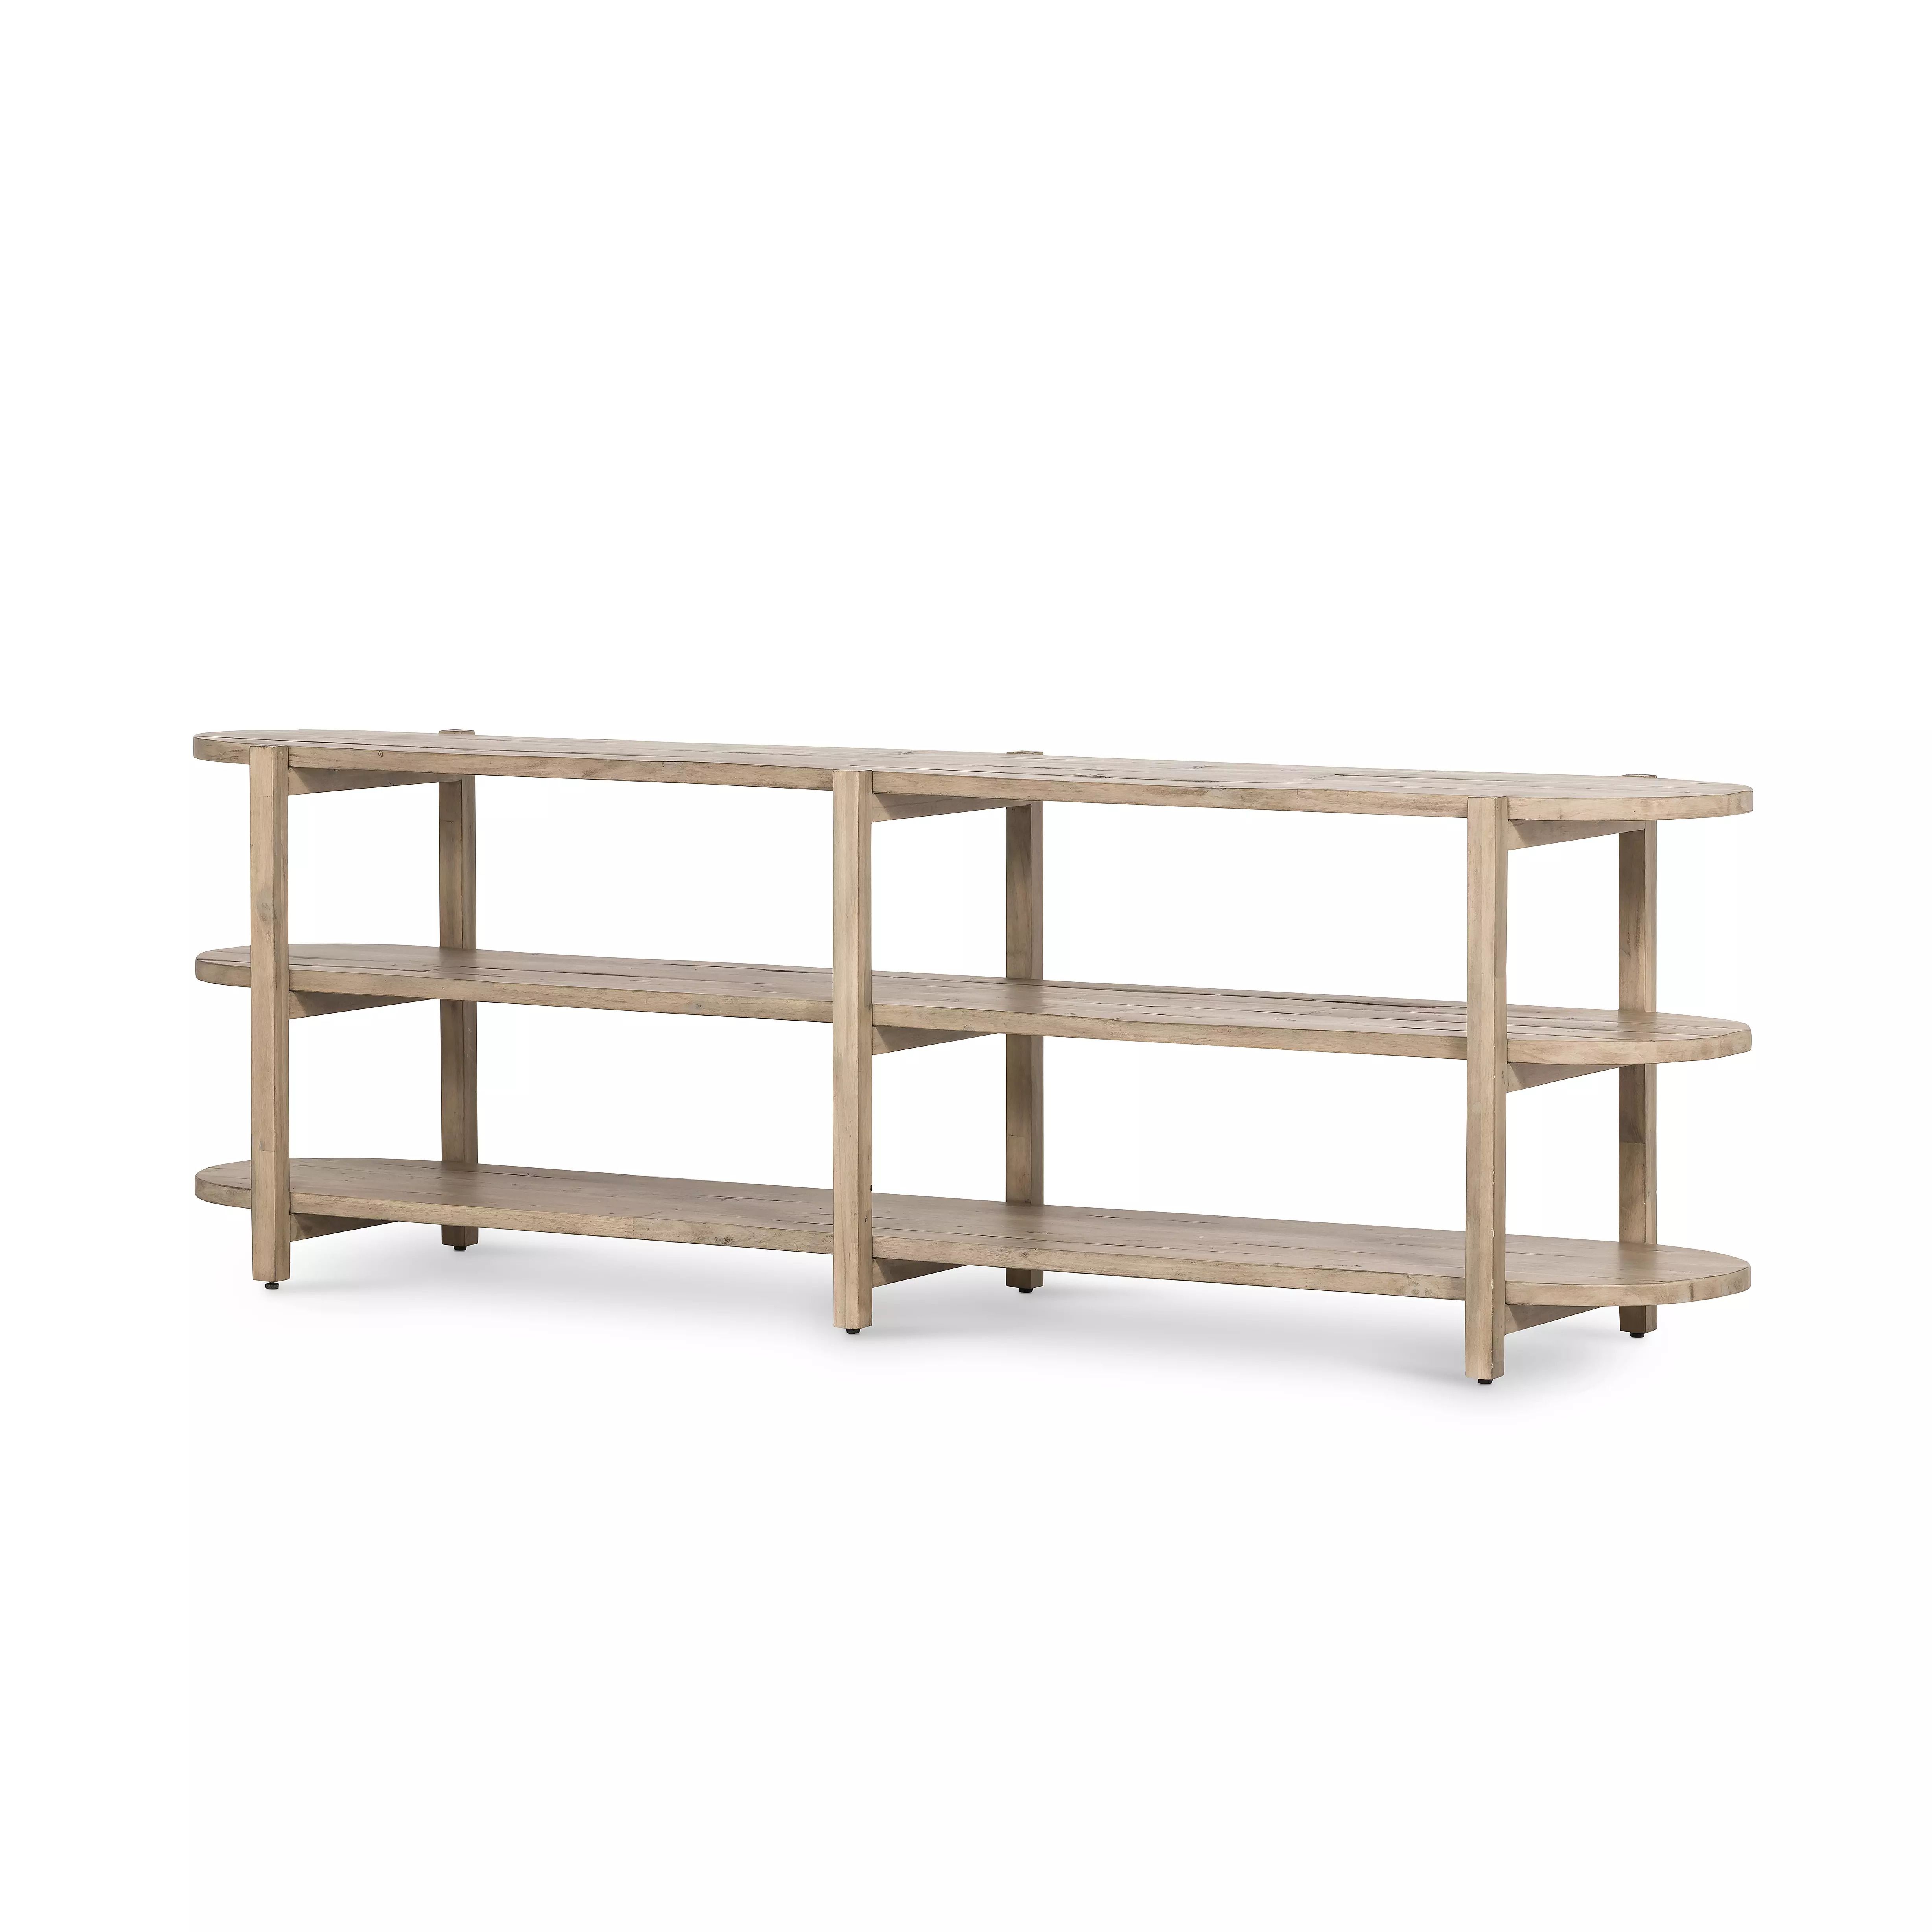 Babs Media Console | Scout & Nimble